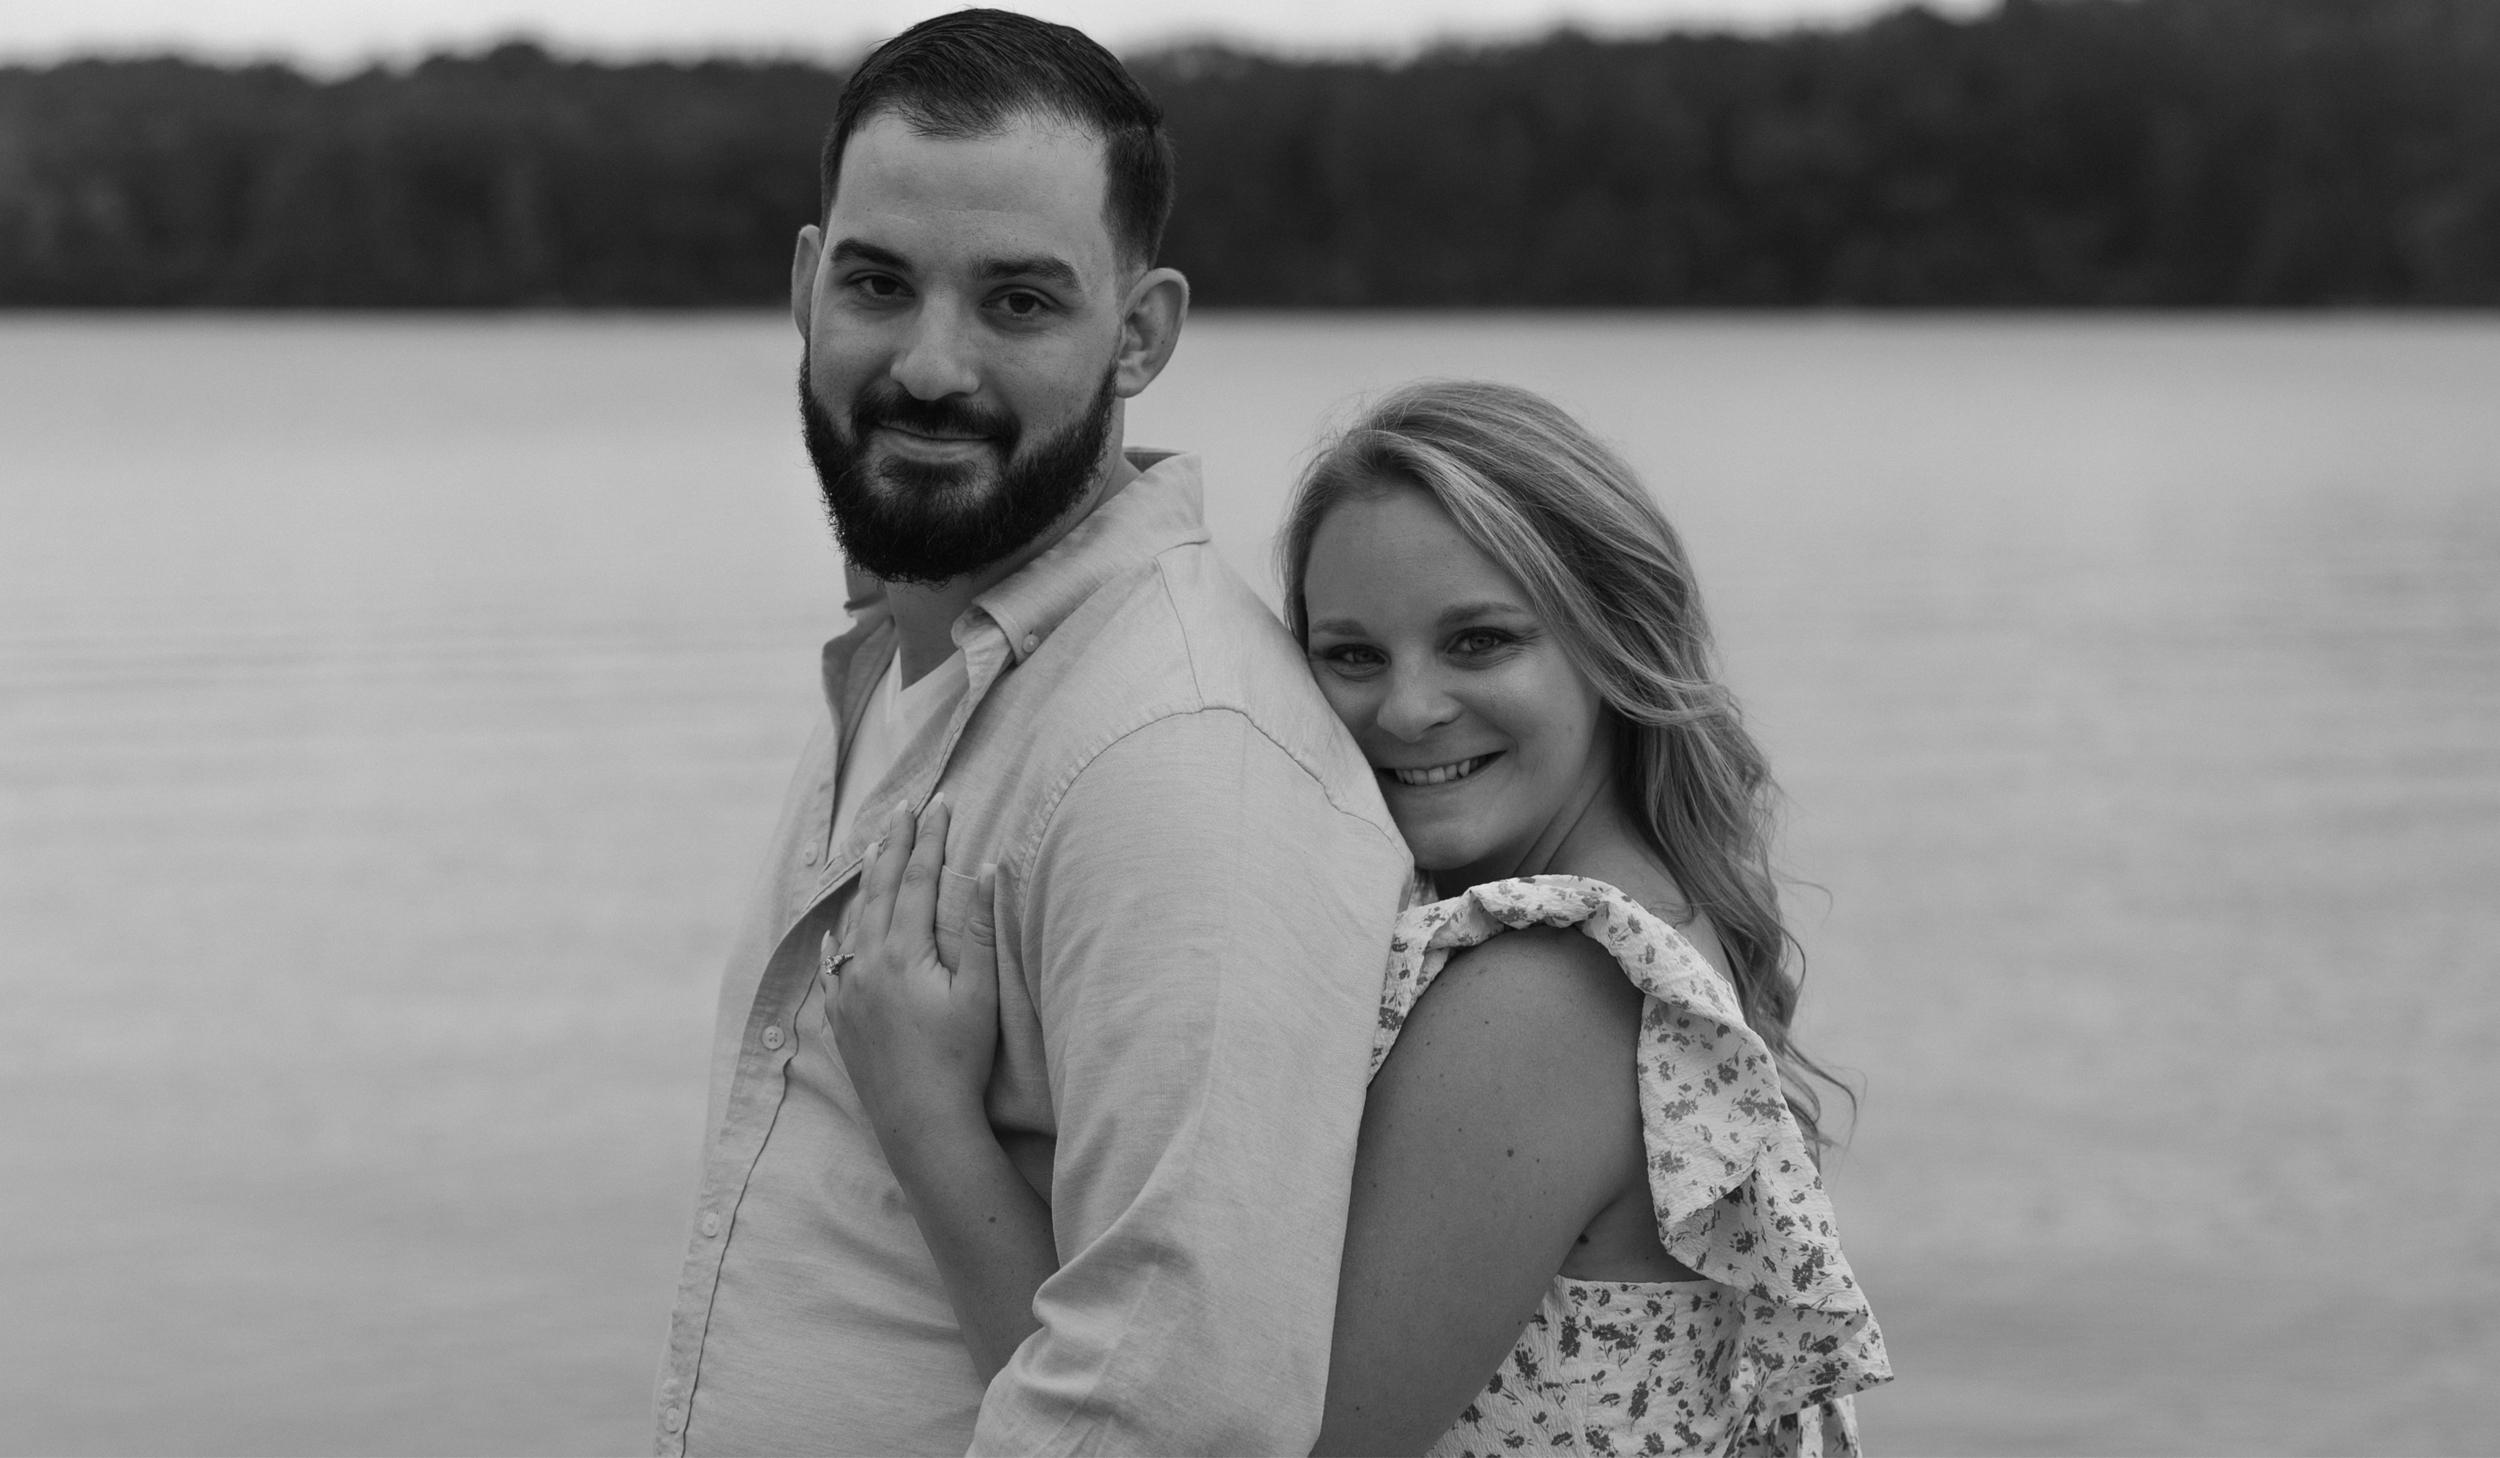 The Wedding Website of Tayler Belham and Colin Hickey